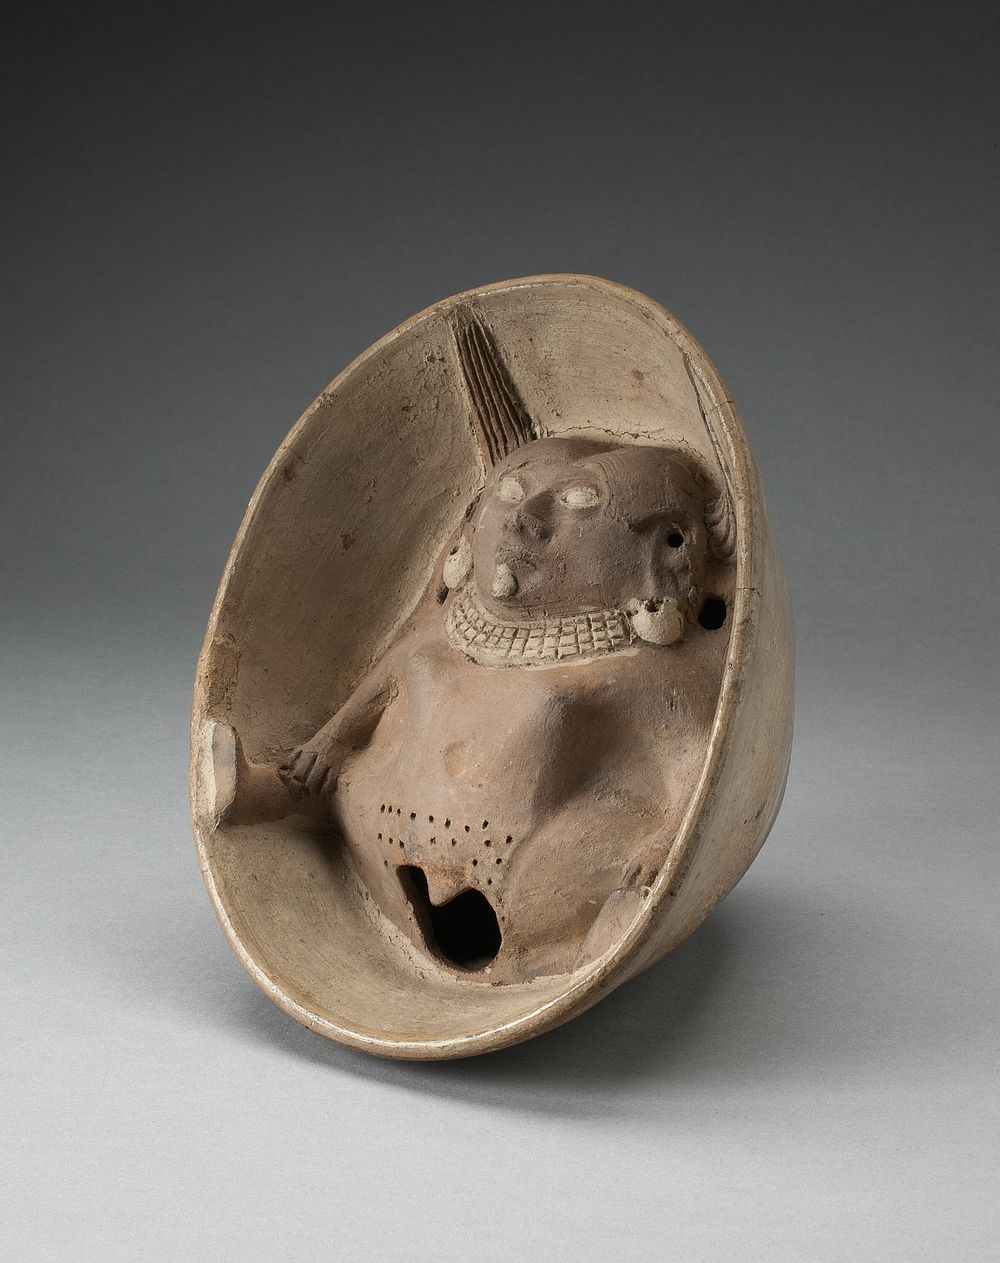 Bowl with Sculpted Female Figure with Splayed Legs in Interior by Moche